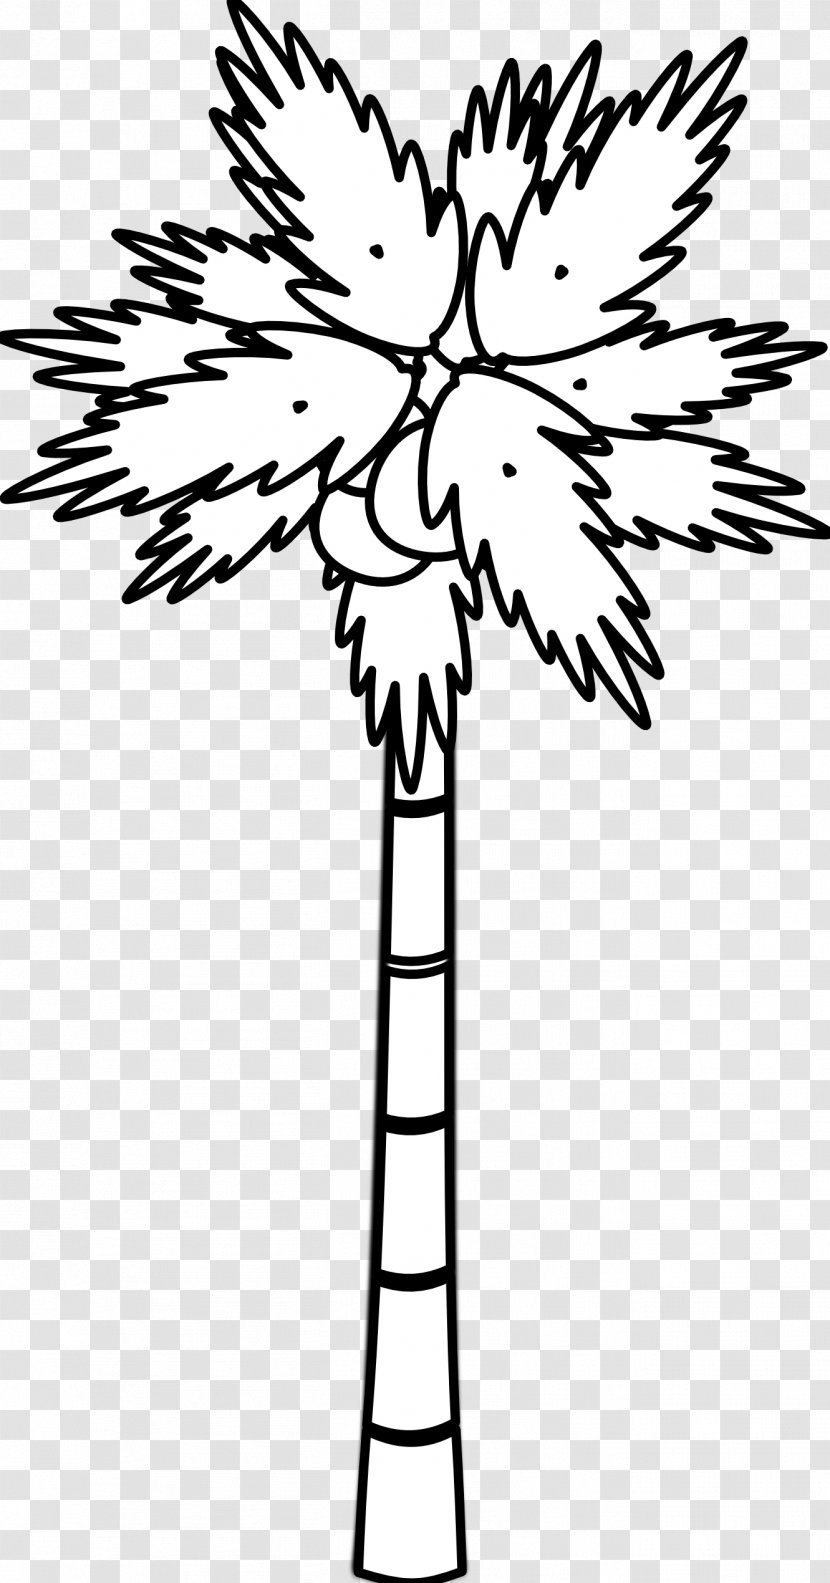 Coconut Tree Arecaceae Clip Art - Black And White Tattoos Transparent PNG